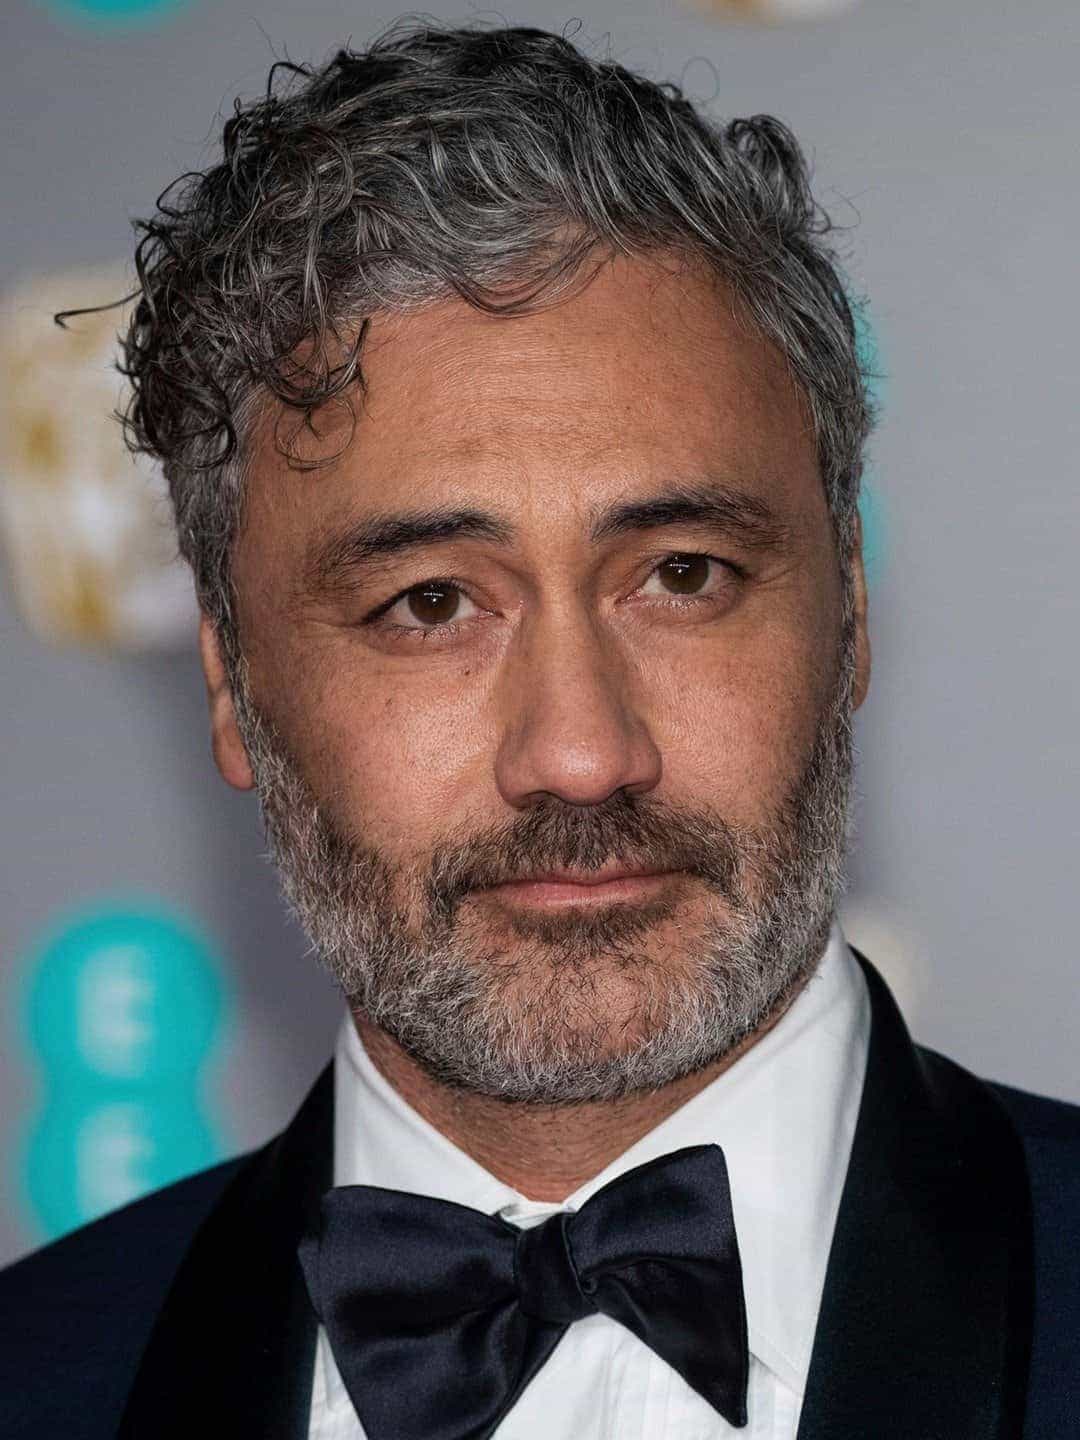 Taika Waititi hired to direct a new Star Wars movie for Disney
